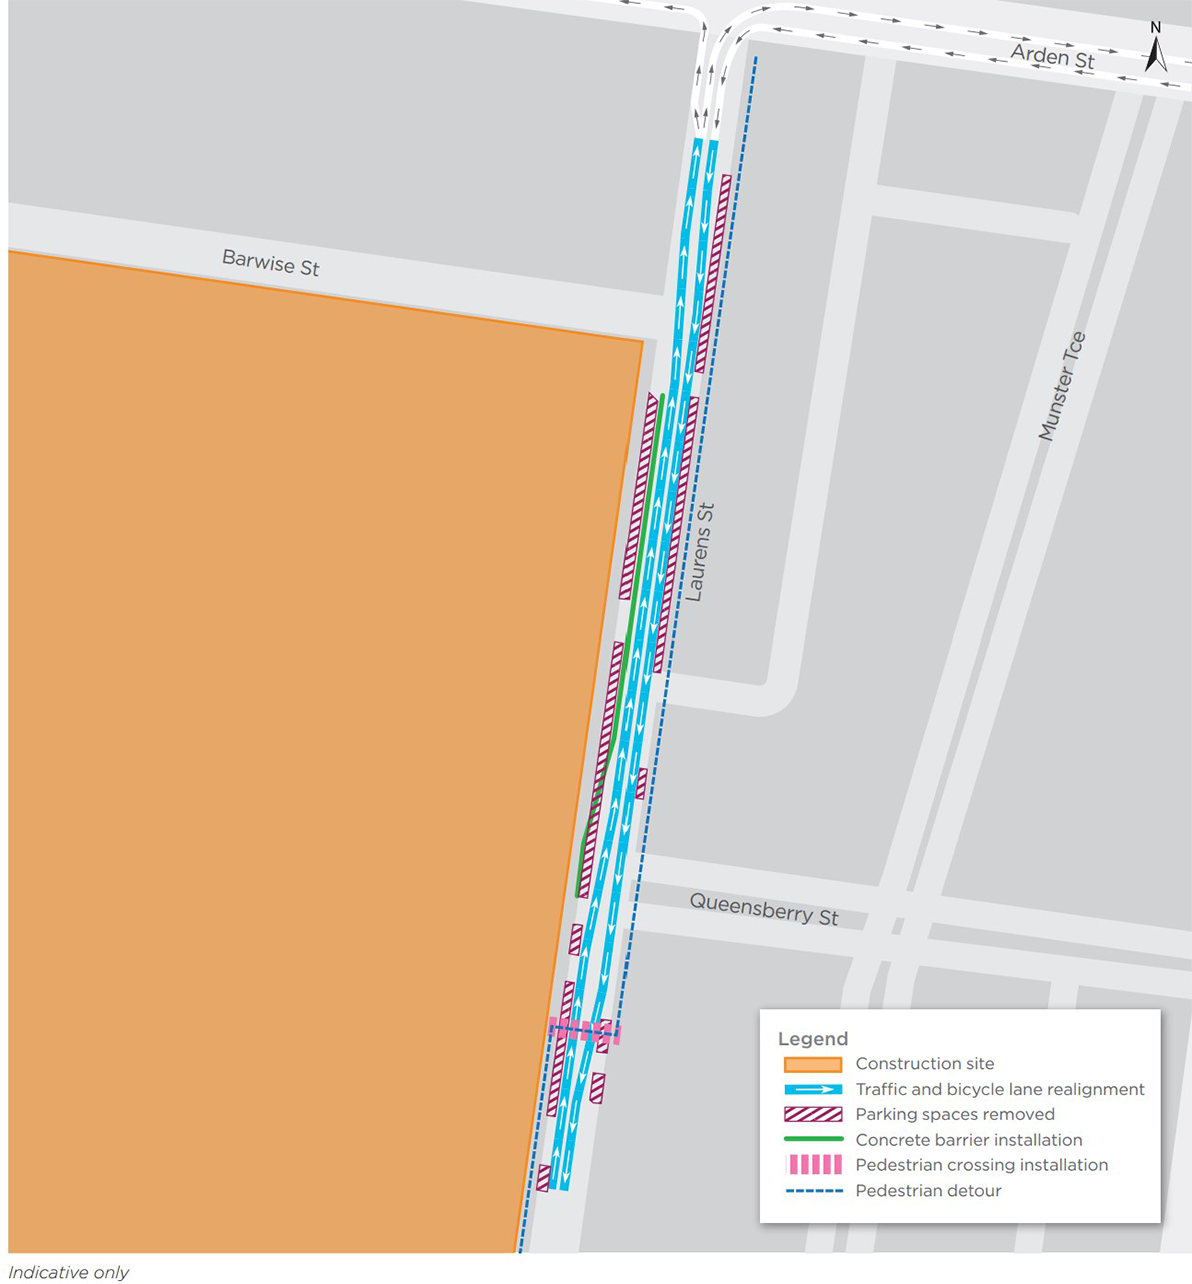 Map showing the traffic changes to Laurens Street described in the text of this page